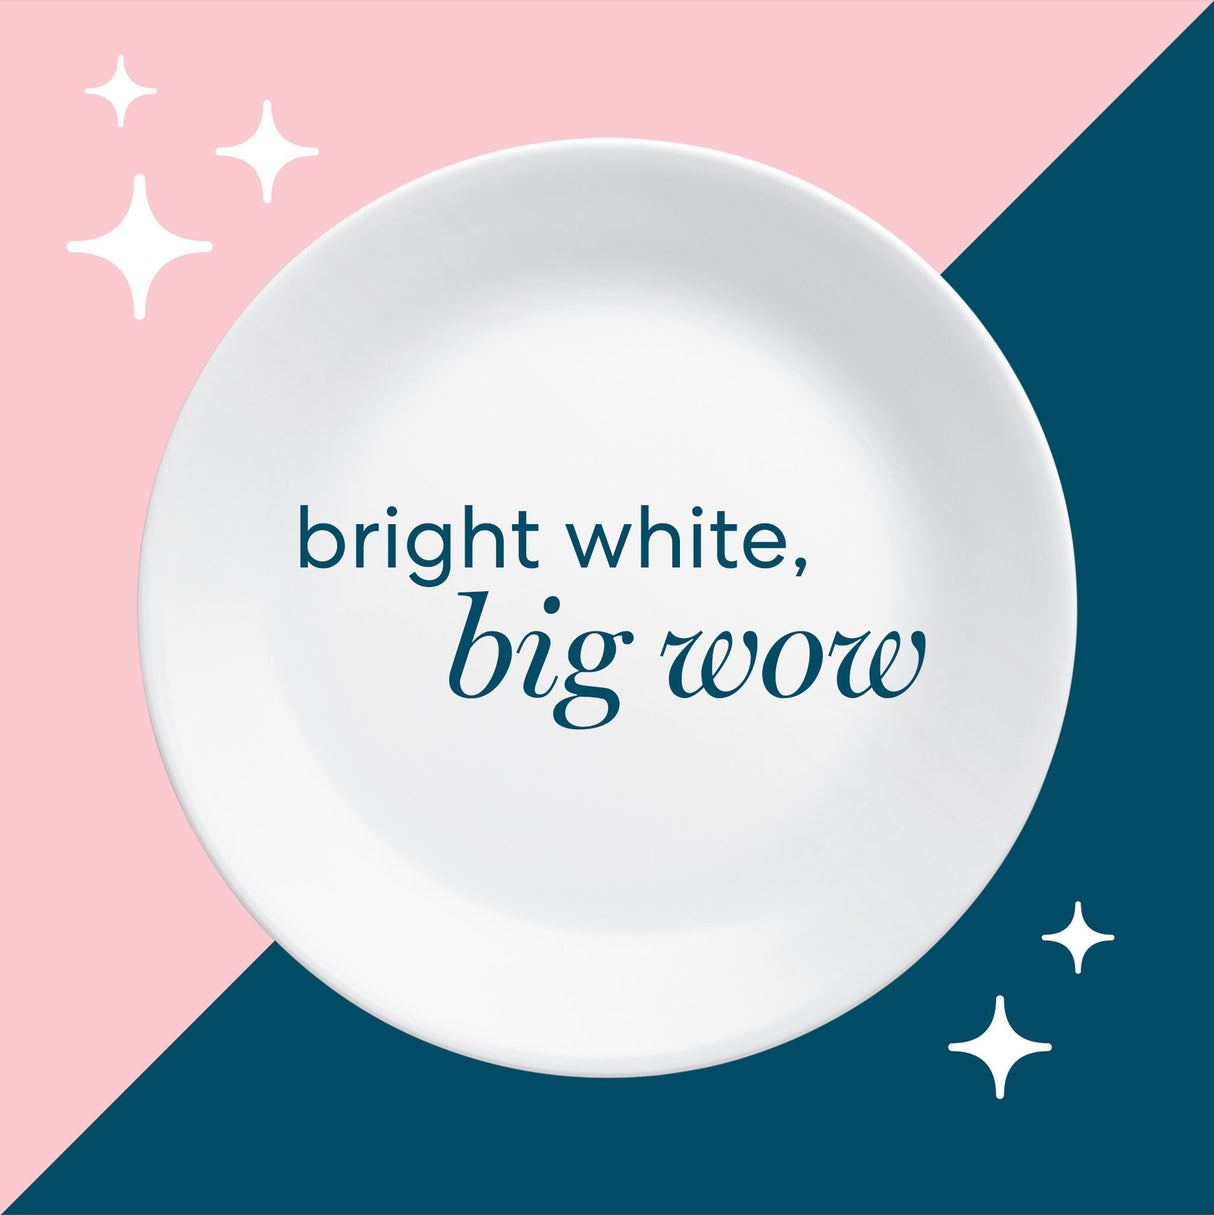  bright white, big wow text with white plate